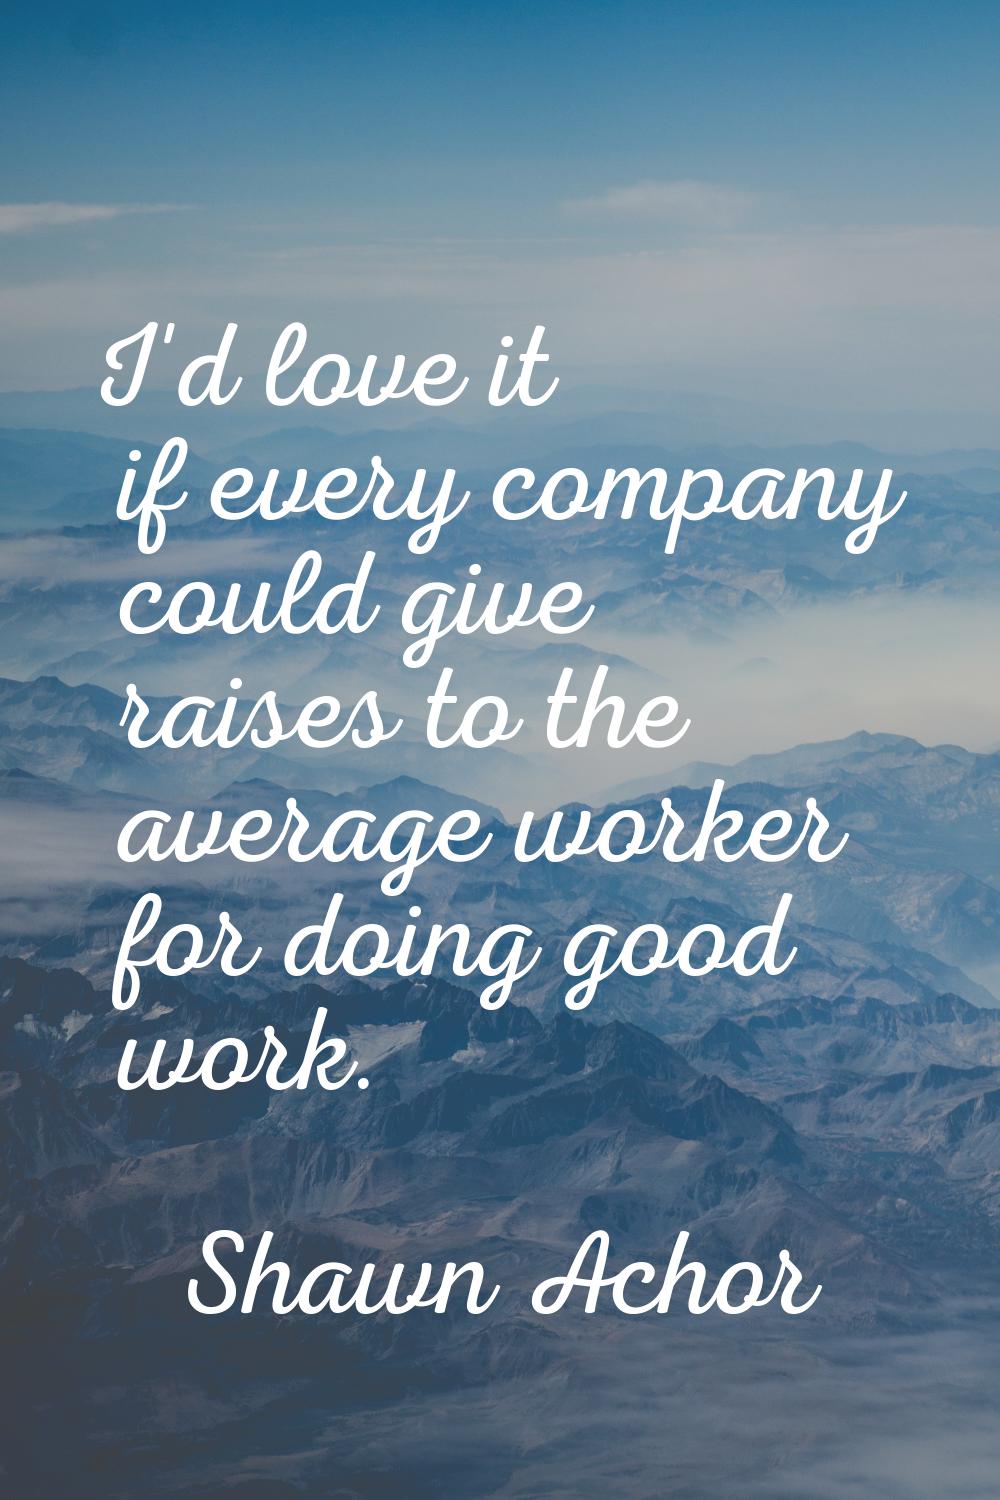 I'd love it if every company could give raises to the average worker for doing good work.